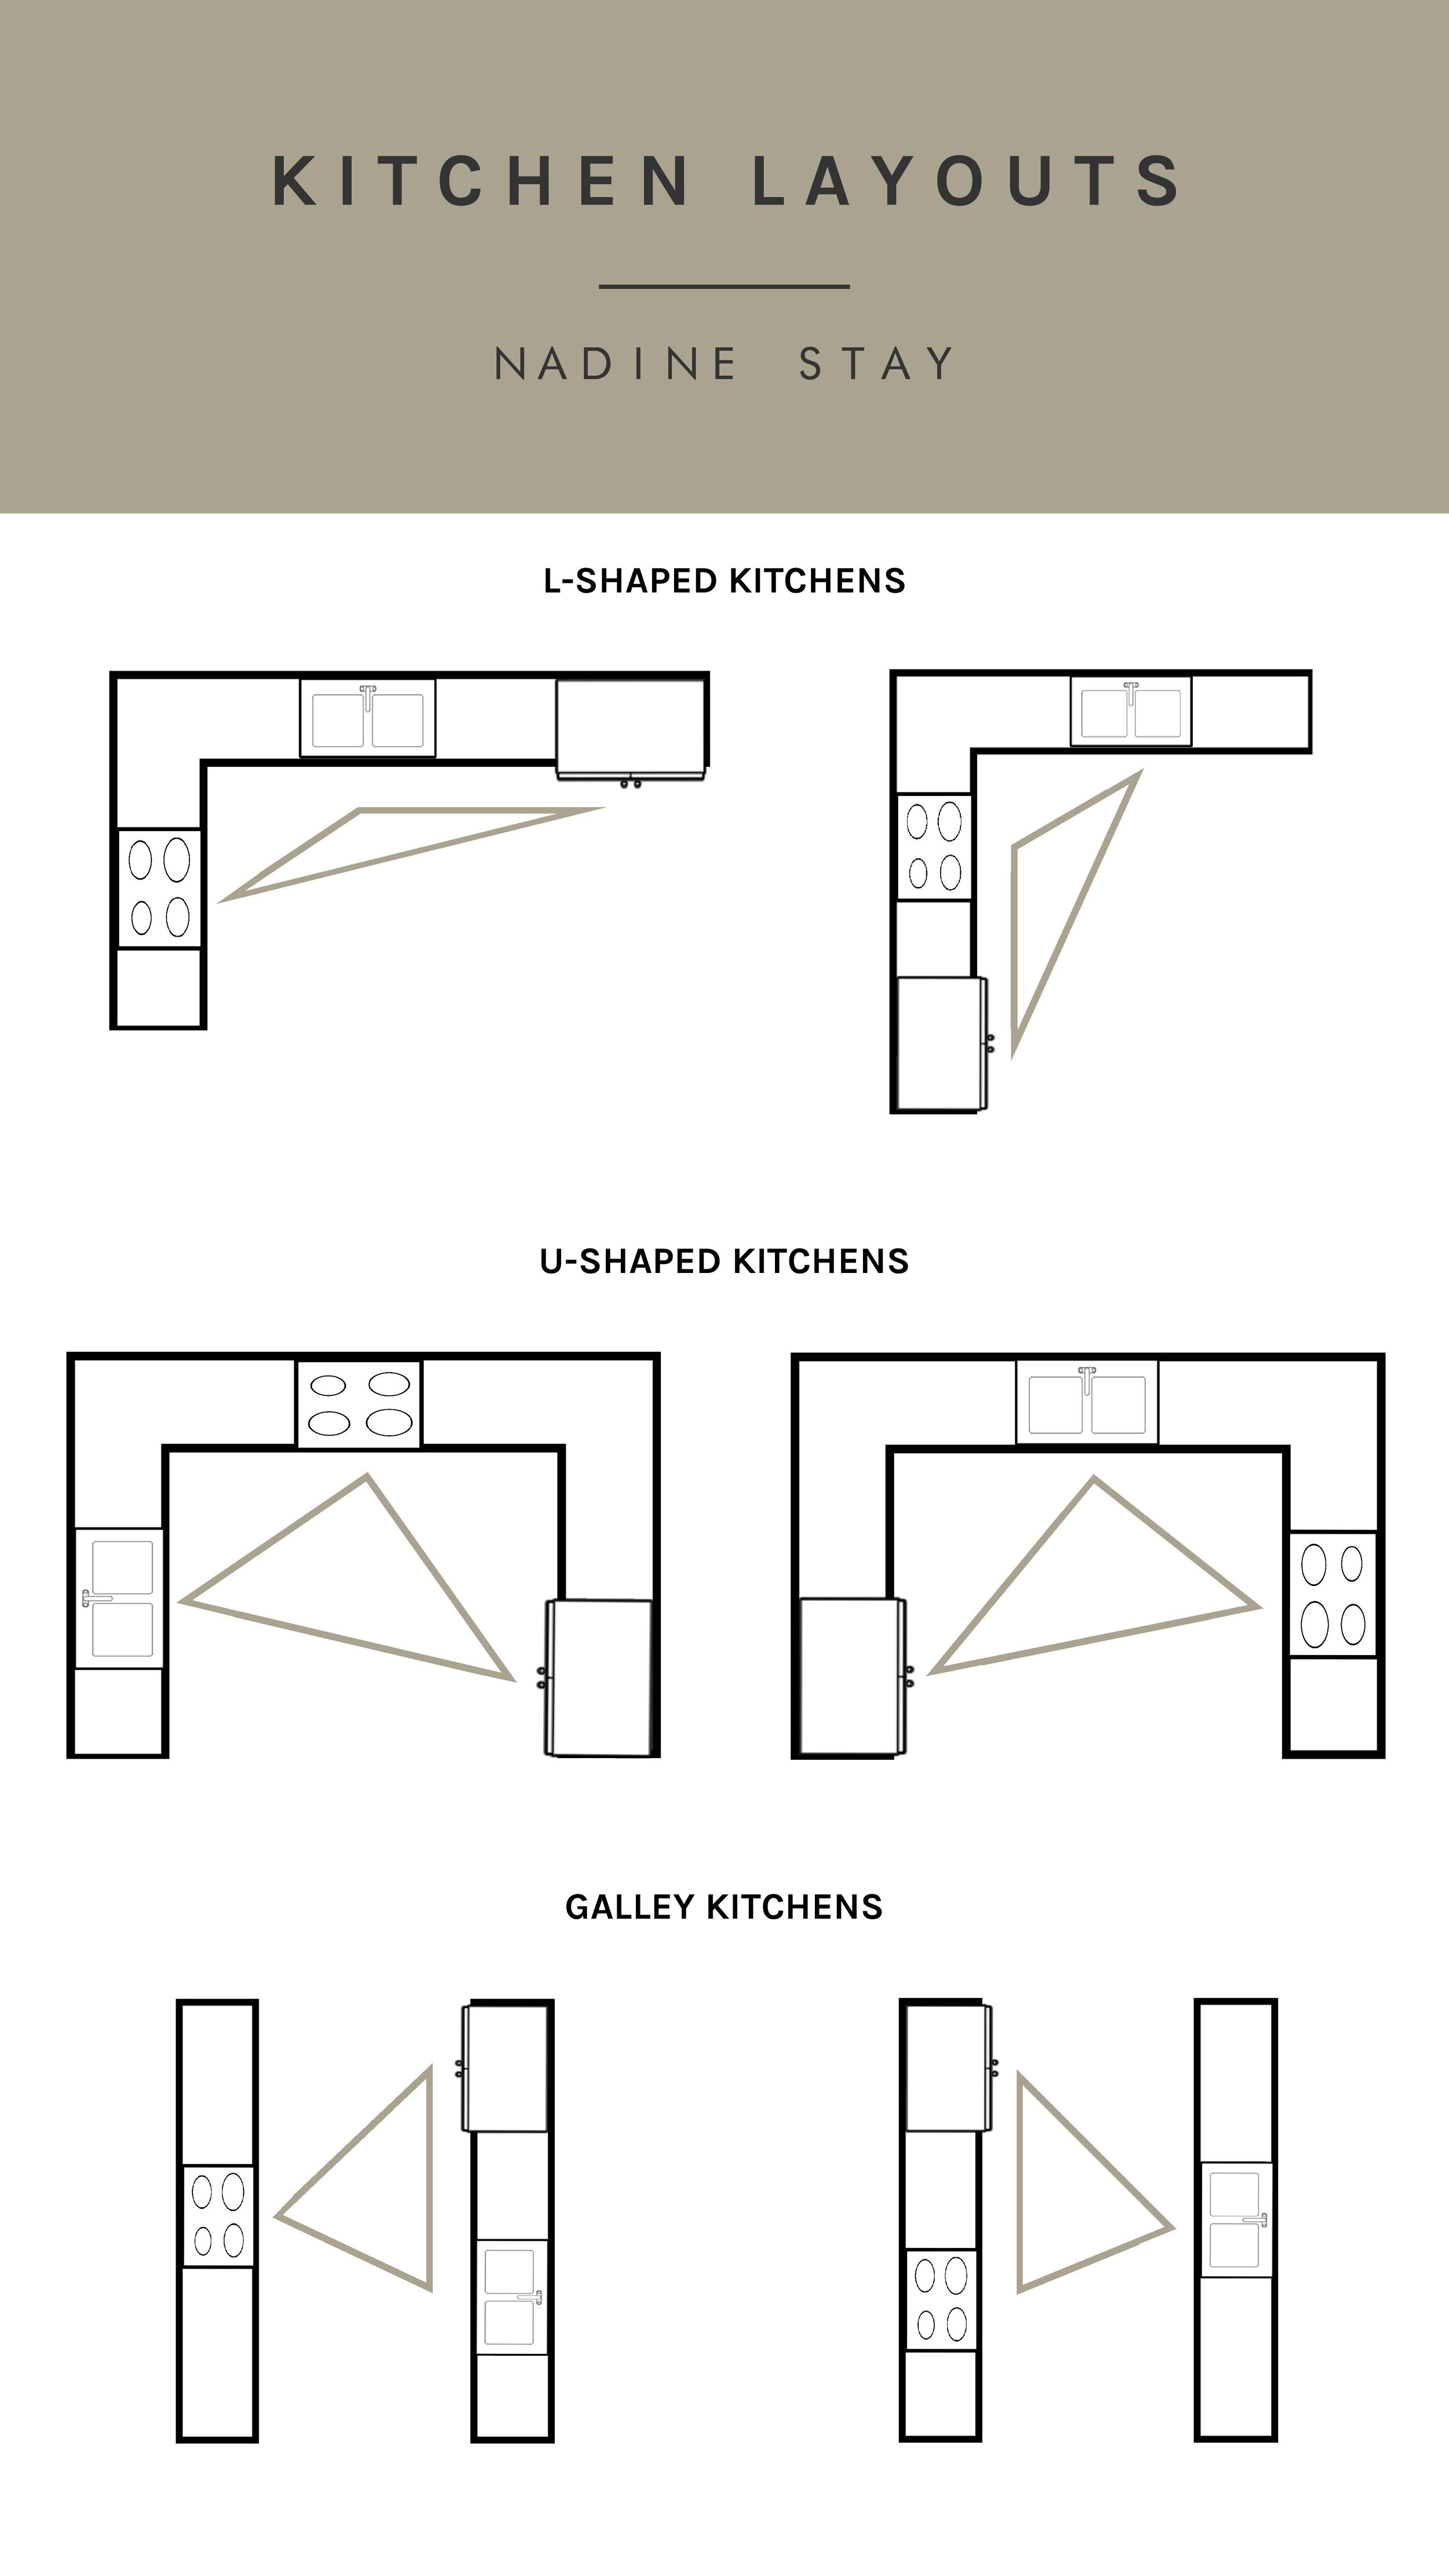 Kitchen layout tips and designer advice - use "The Kitchen Triangle" when planning a kitchen design and remodel. How to plan the positions of your major kitchen appliances. | Nadine Stay